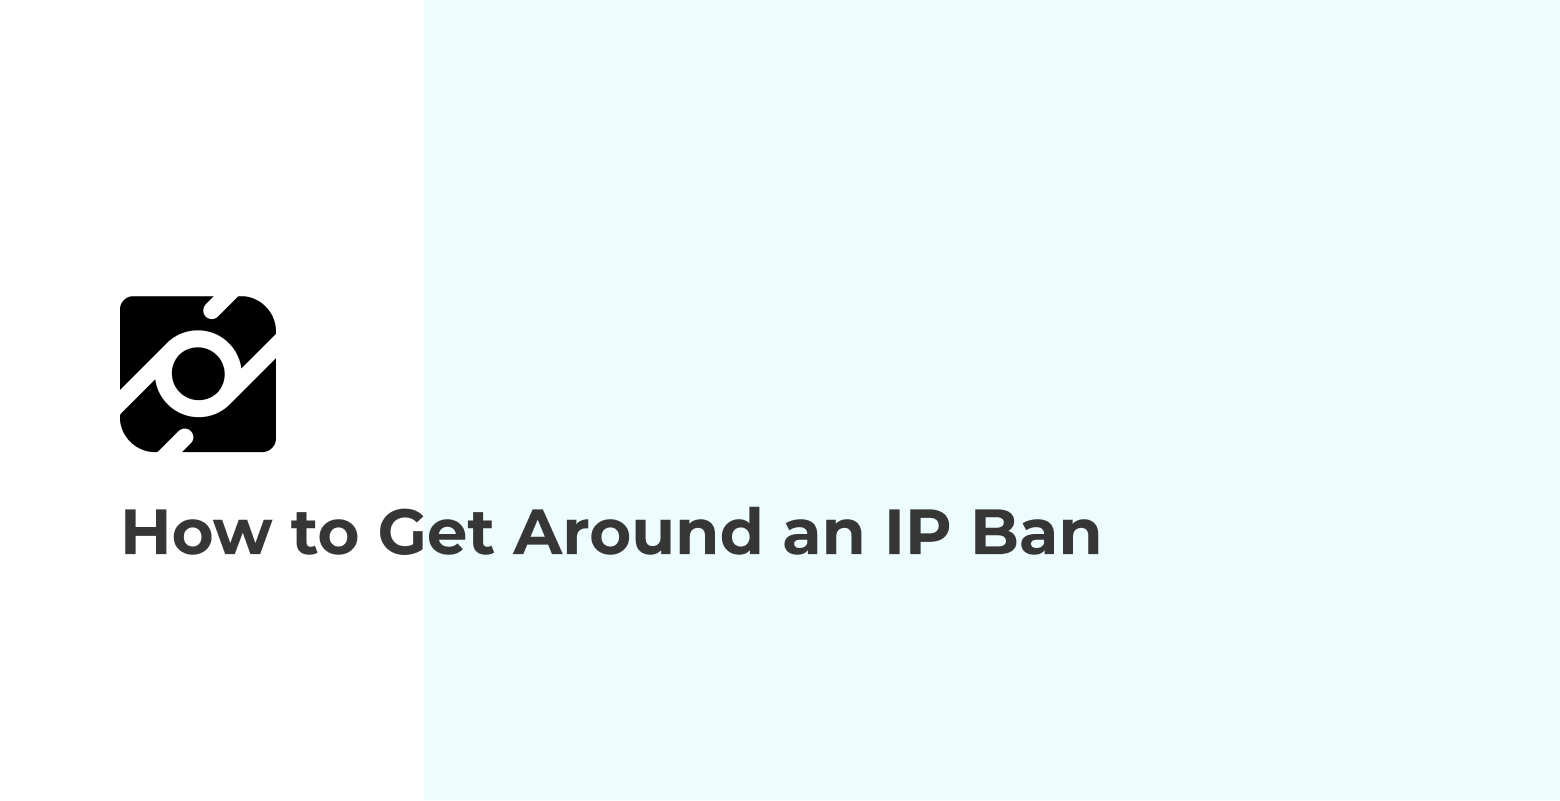 How to Get Around an IP Ban